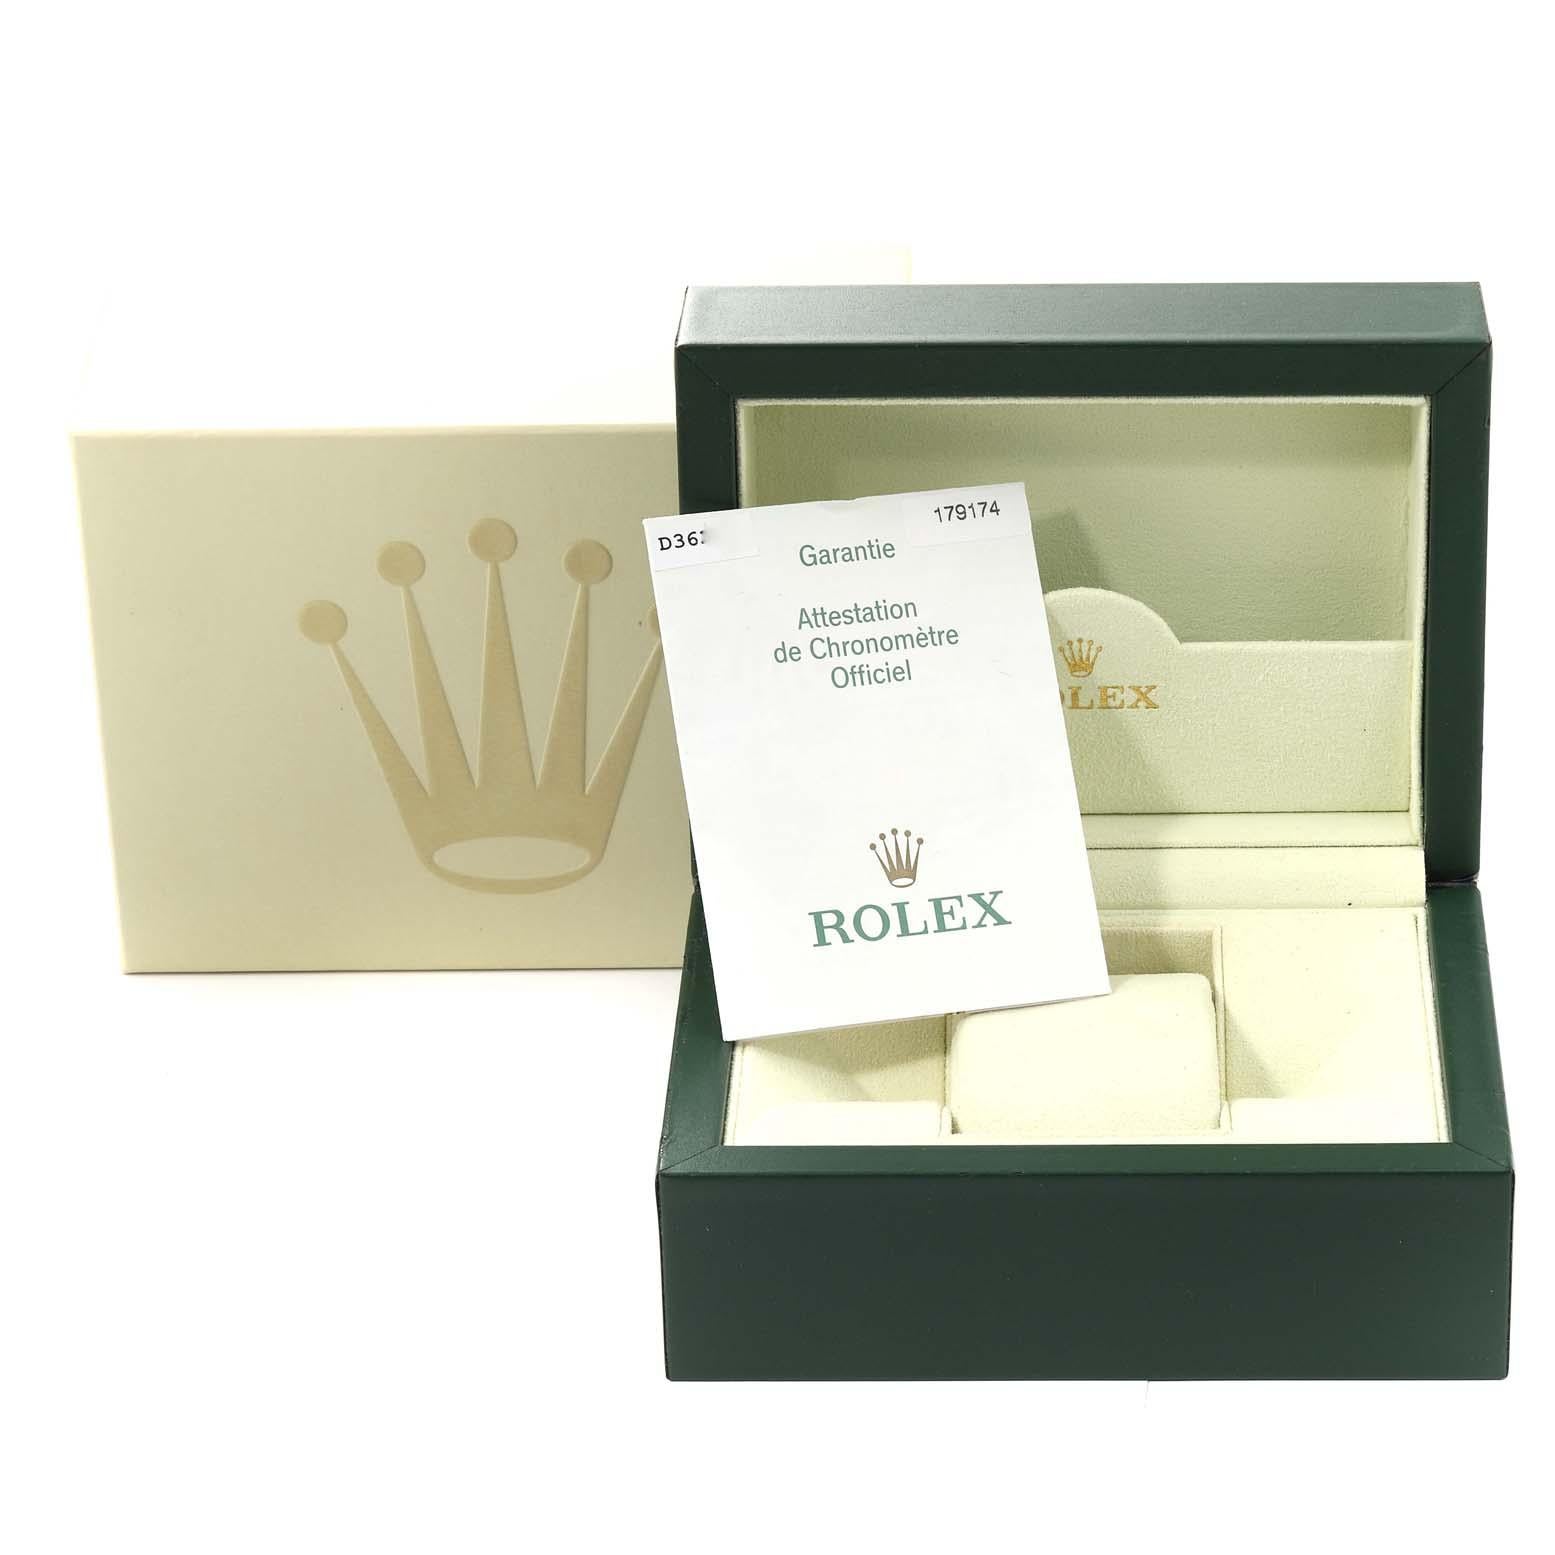 Rolex Datejust Steel White Gold Silver Dial Ladies Watch 179174 Box Papers en vente 6